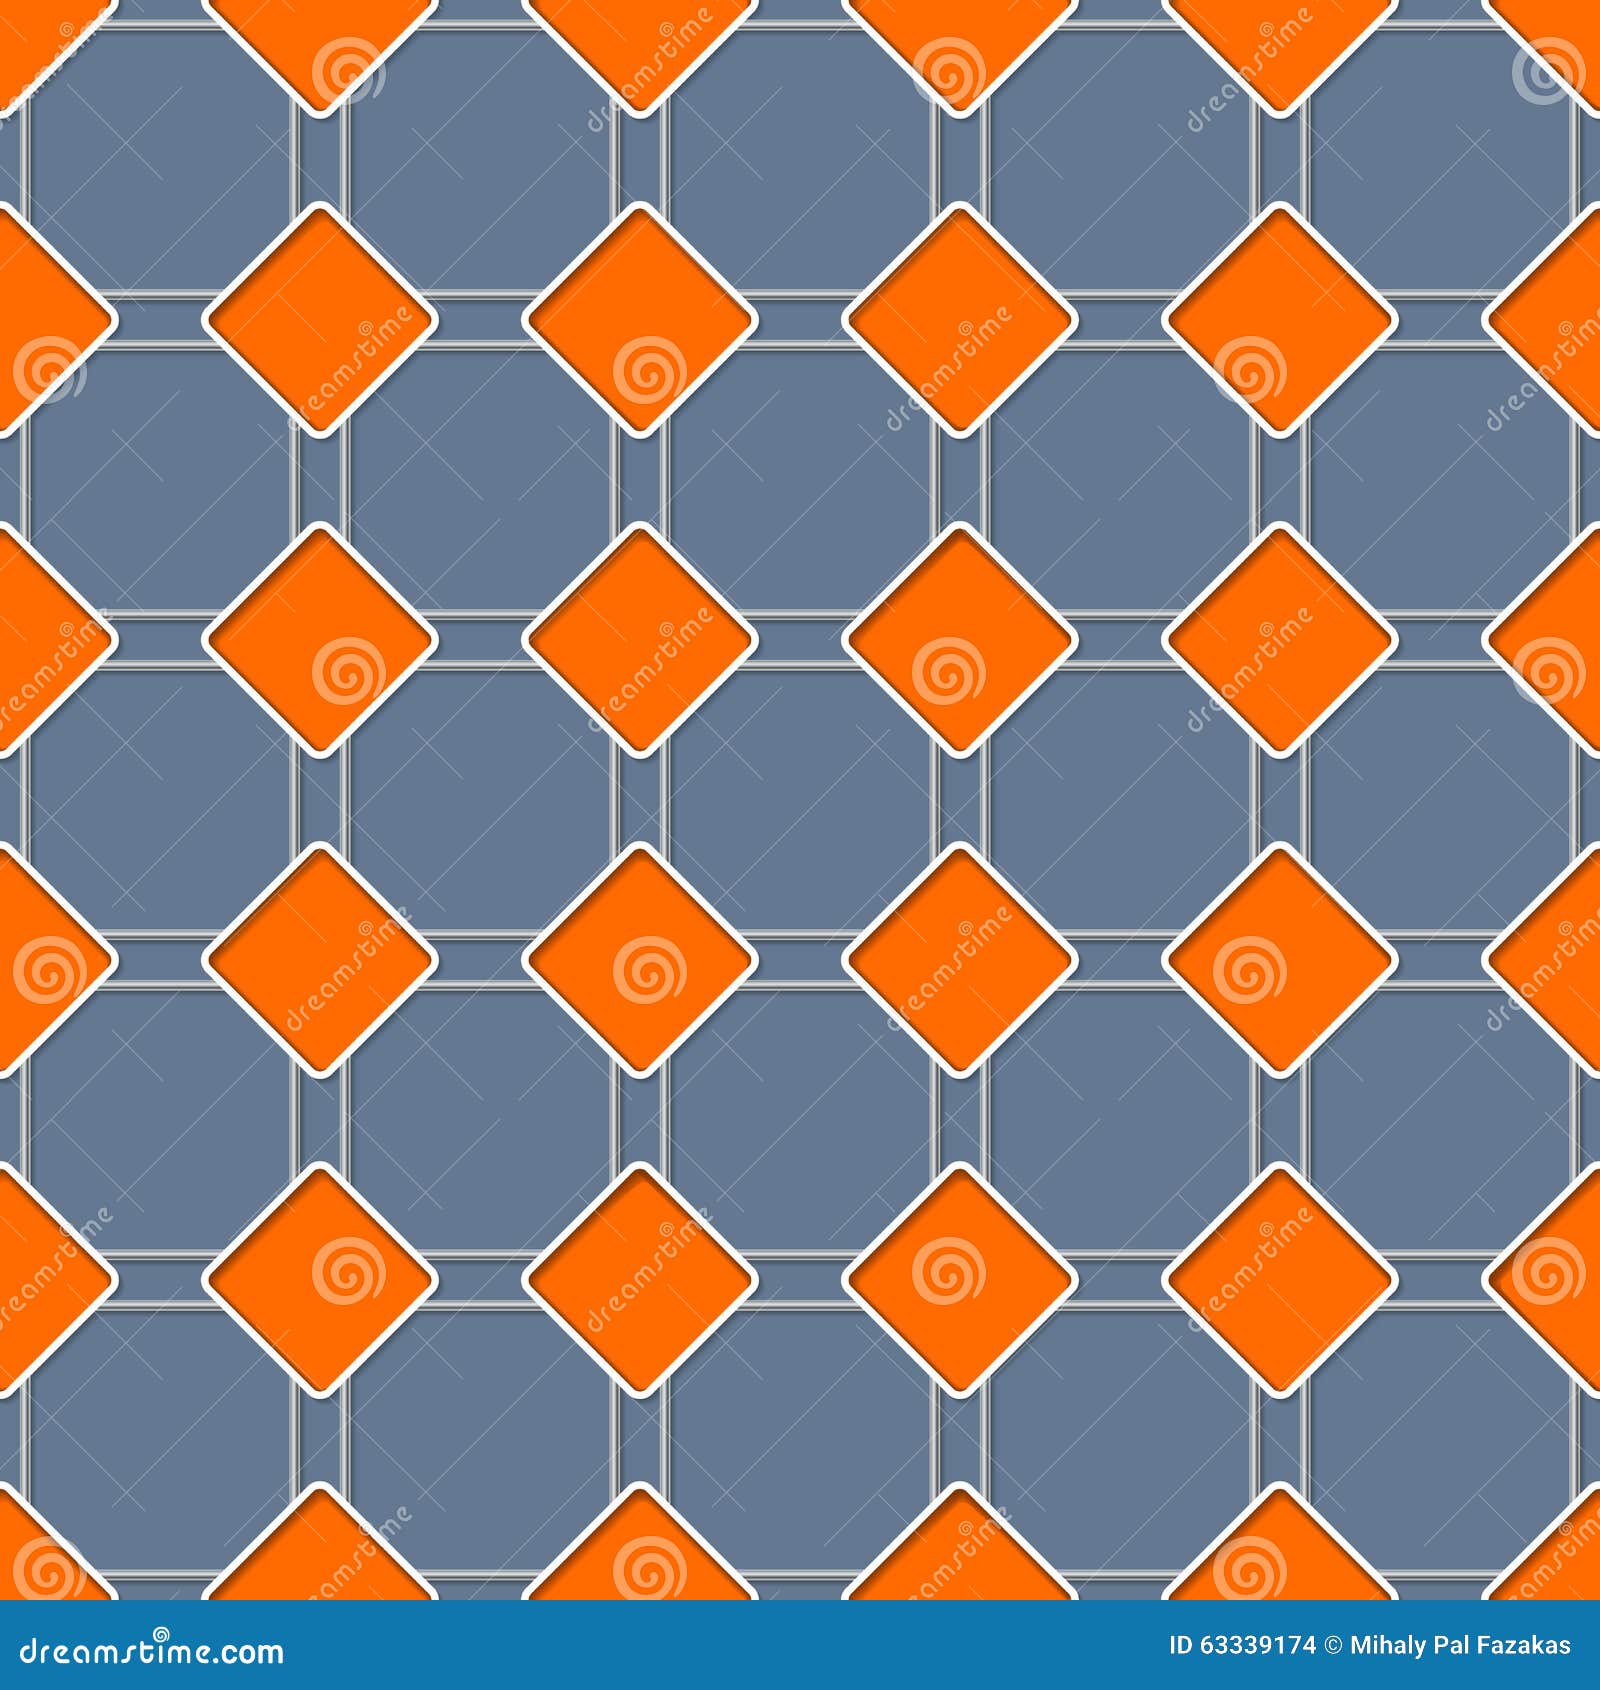 seamless rhomb pattern with 3d effect